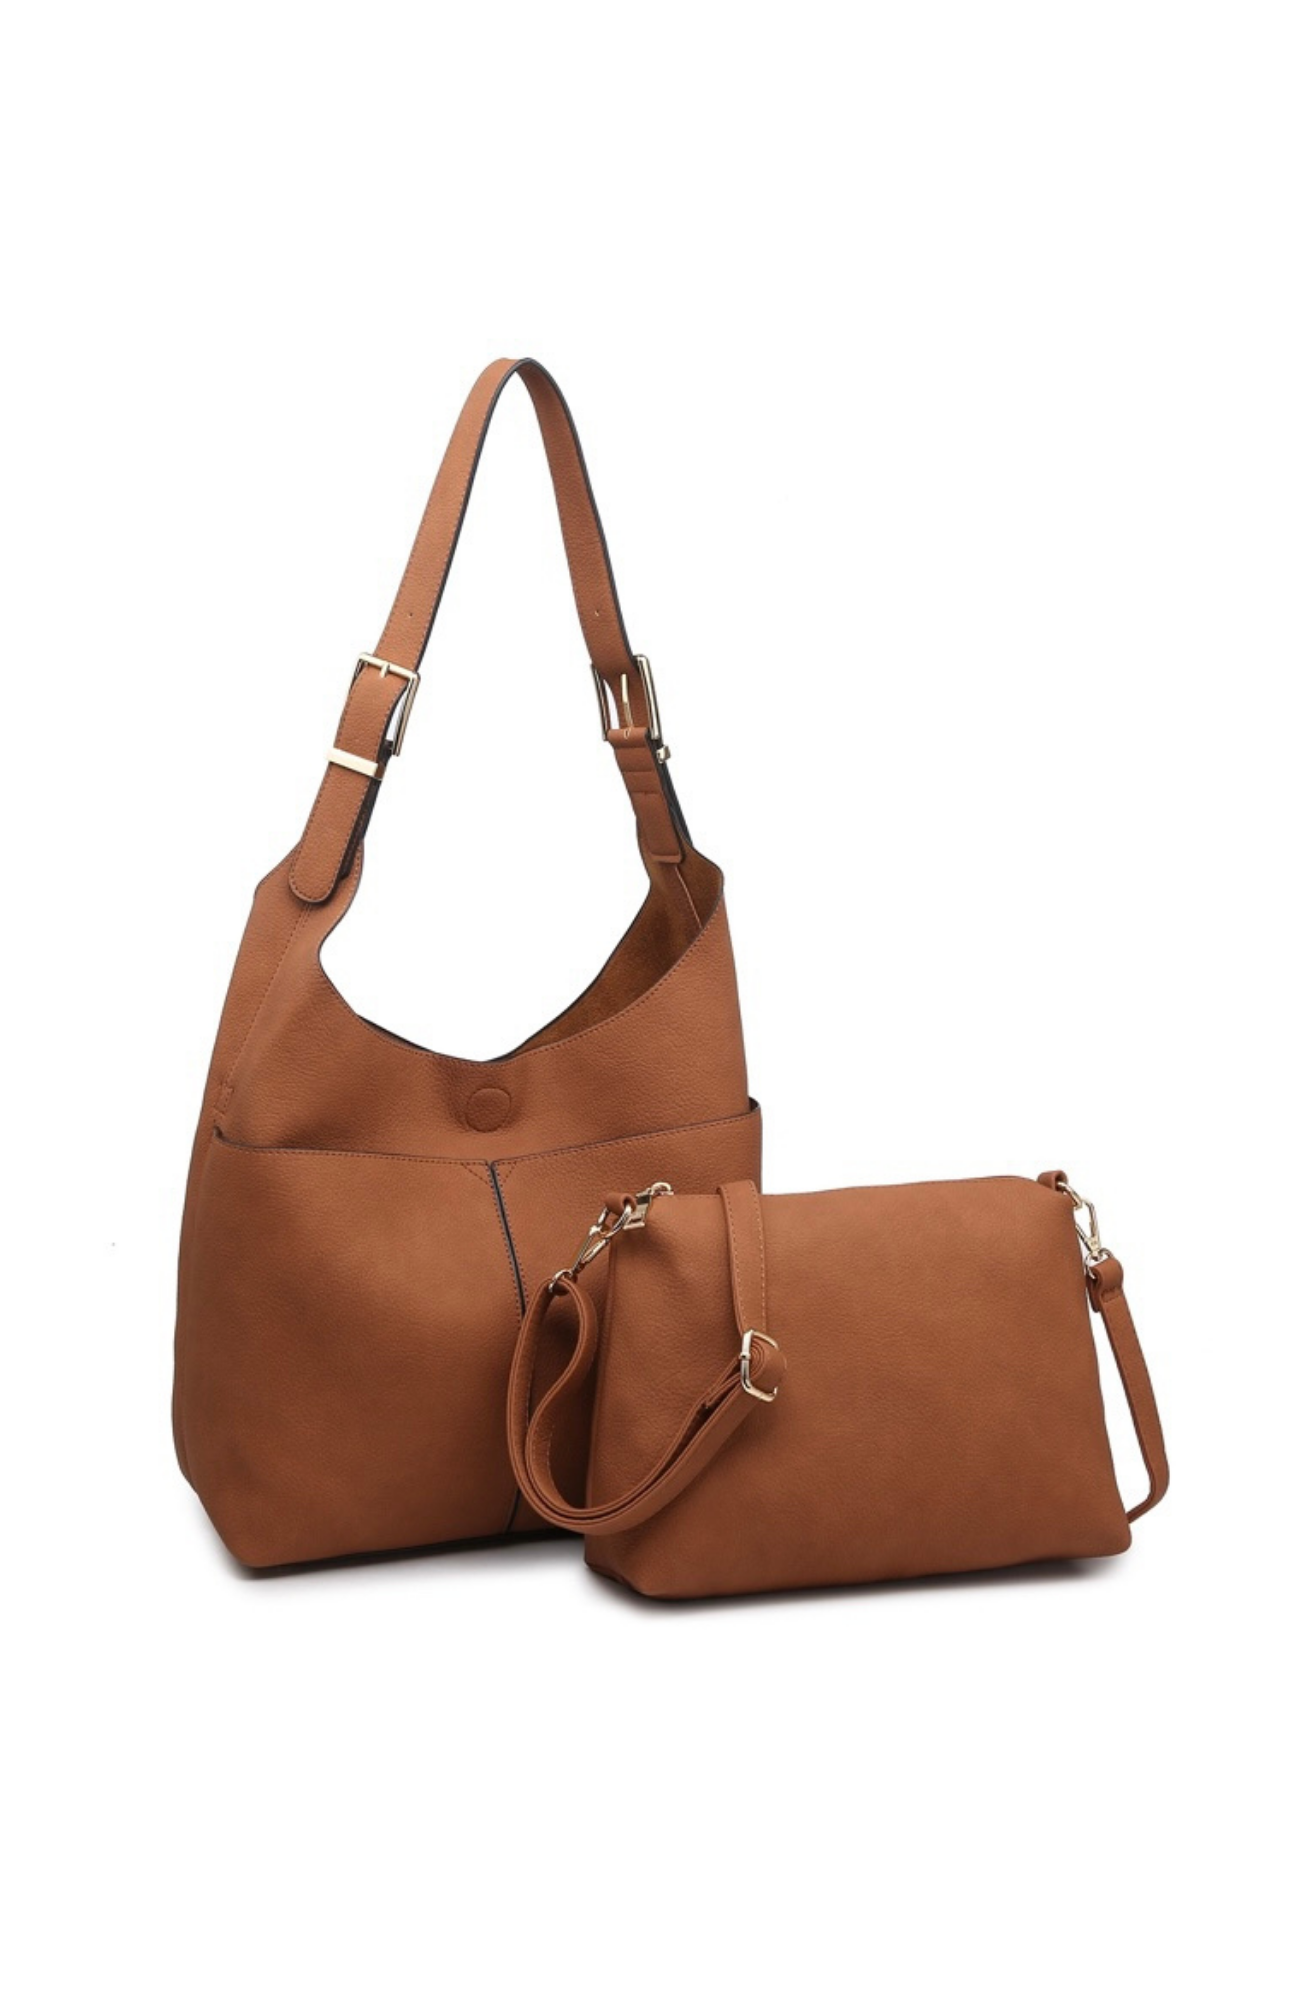 Brown Slouchy hobo bag with buckle adjustable strap, soft vegan leather, front slip pocket and detachable crossbody strap for inner bag that is included. Dimensions - 16” L x 12” H c 6” D